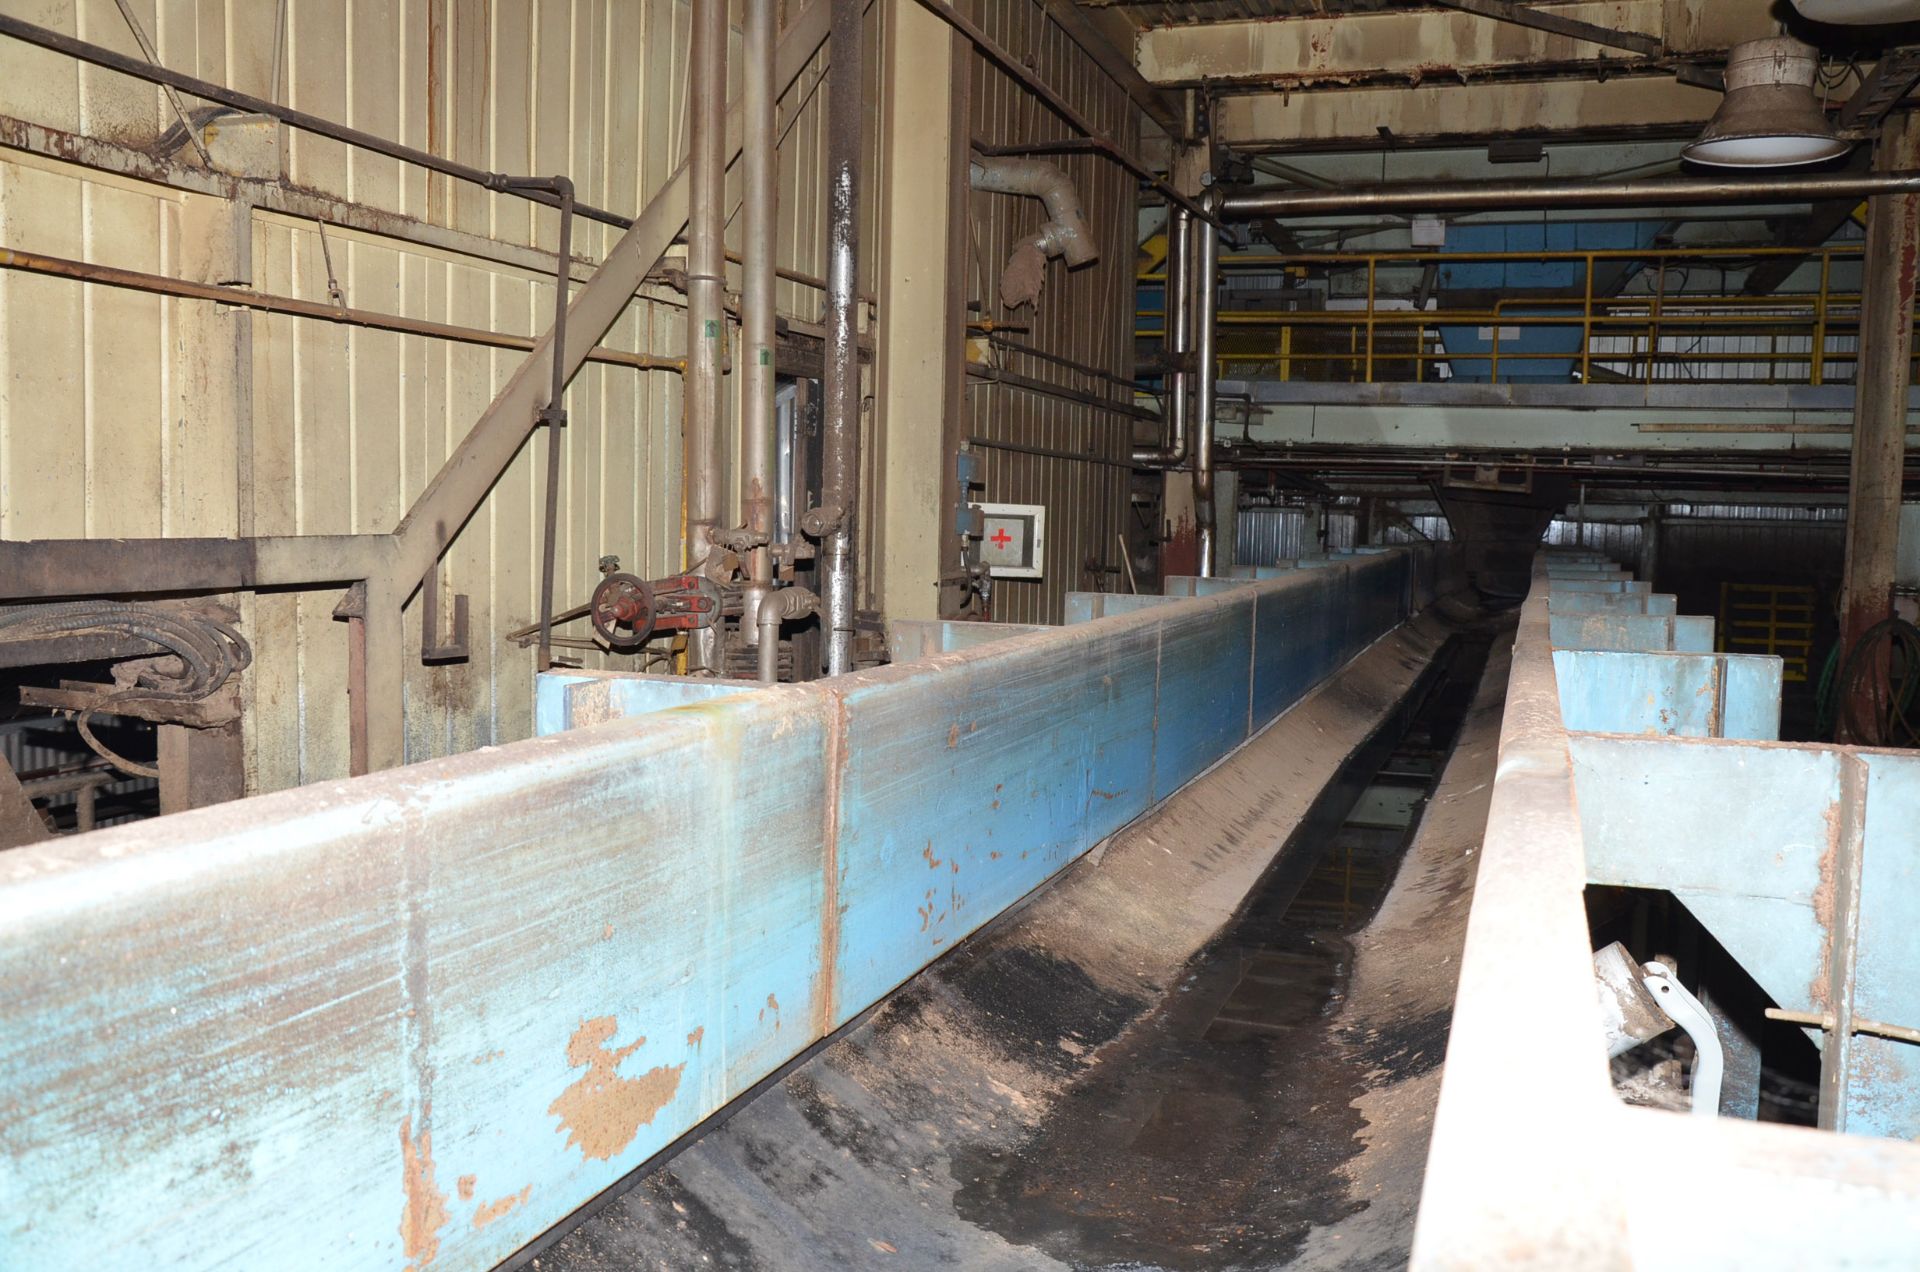 DINGWELLS 24" X 80' APROX. POWERED HORIZONTAL BELT CONVEYOR WITH DISCHARGE CHUTE, S/N N/A [RIGGING - Image 3 of 3